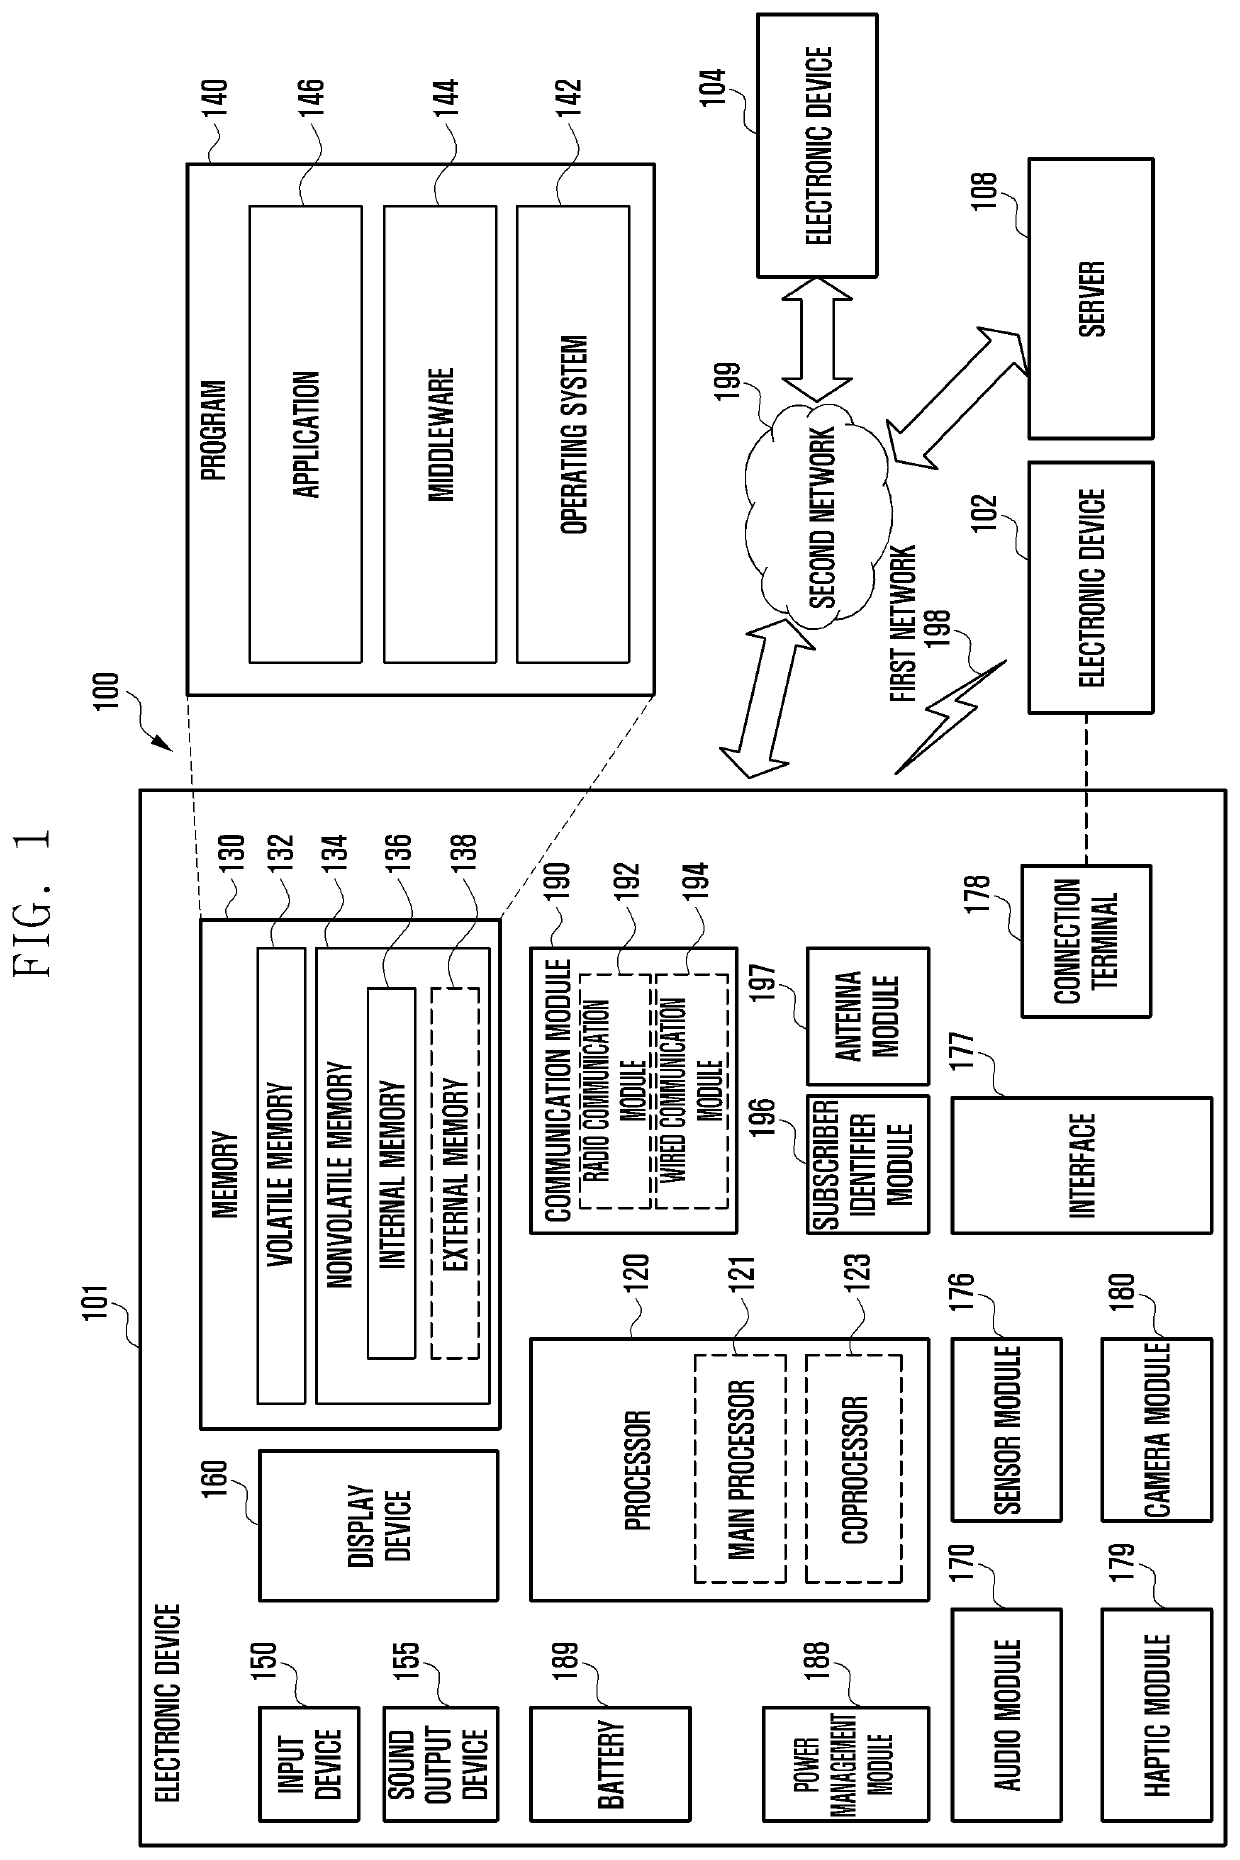 Method and apparatus for providing notification by interworking plurality of electronic devices